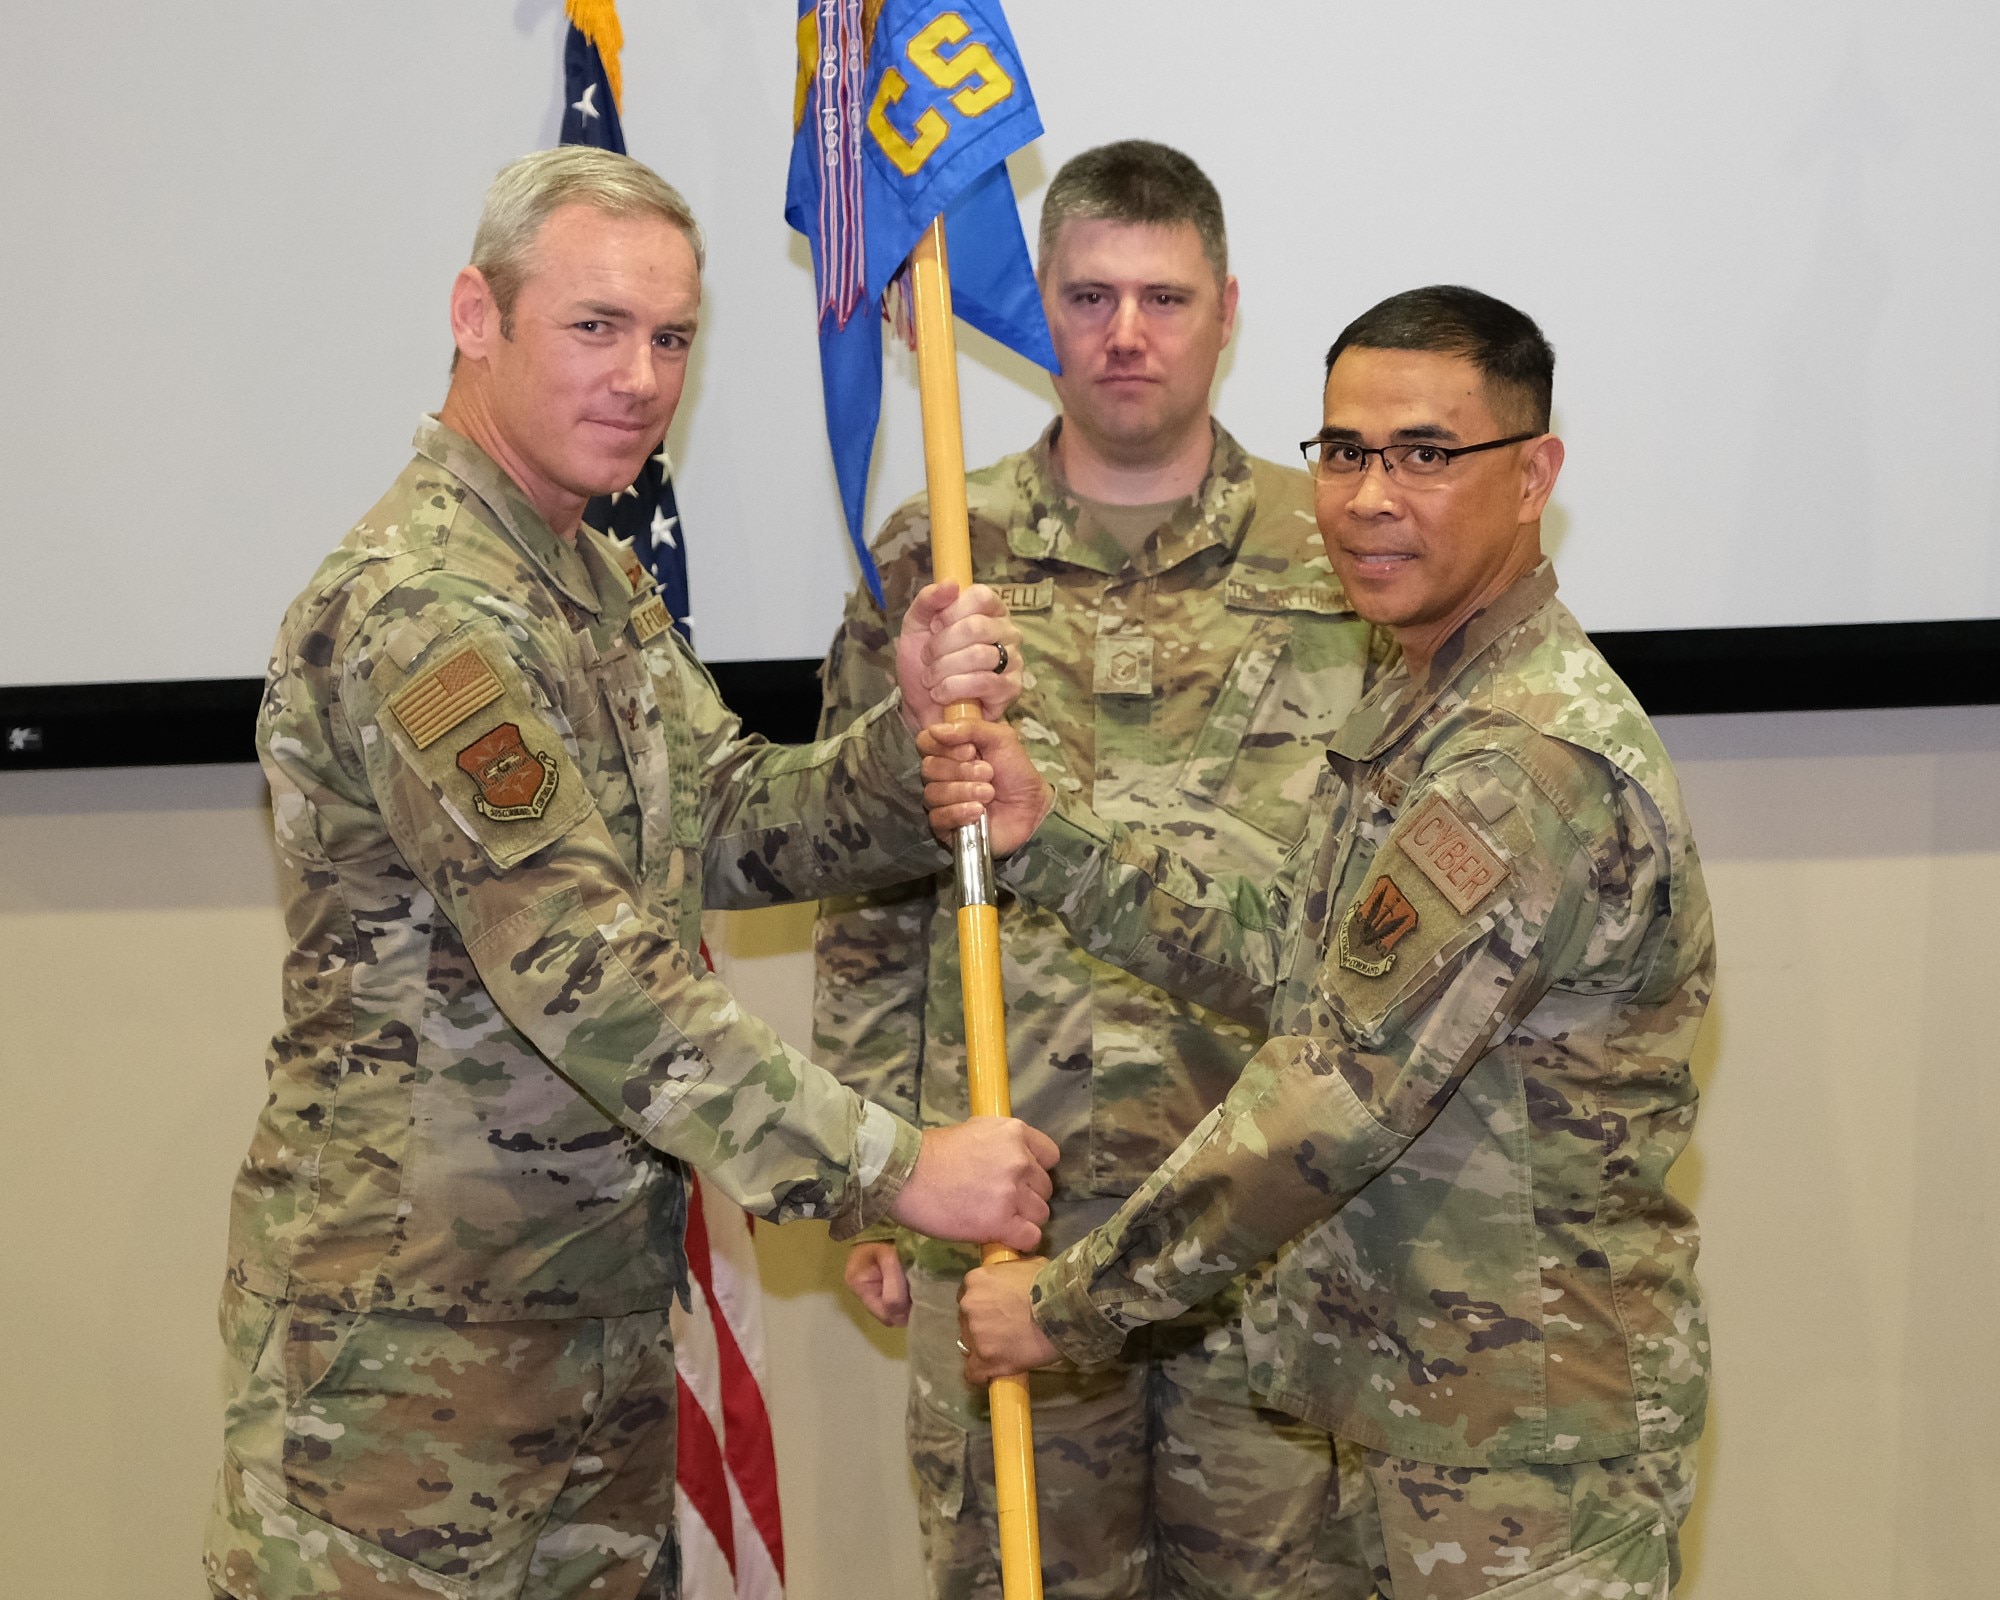 Alt caption: photo of three U.S. Air Force Airmen, two standing holding a unit guidon with Airmen standing in the background.